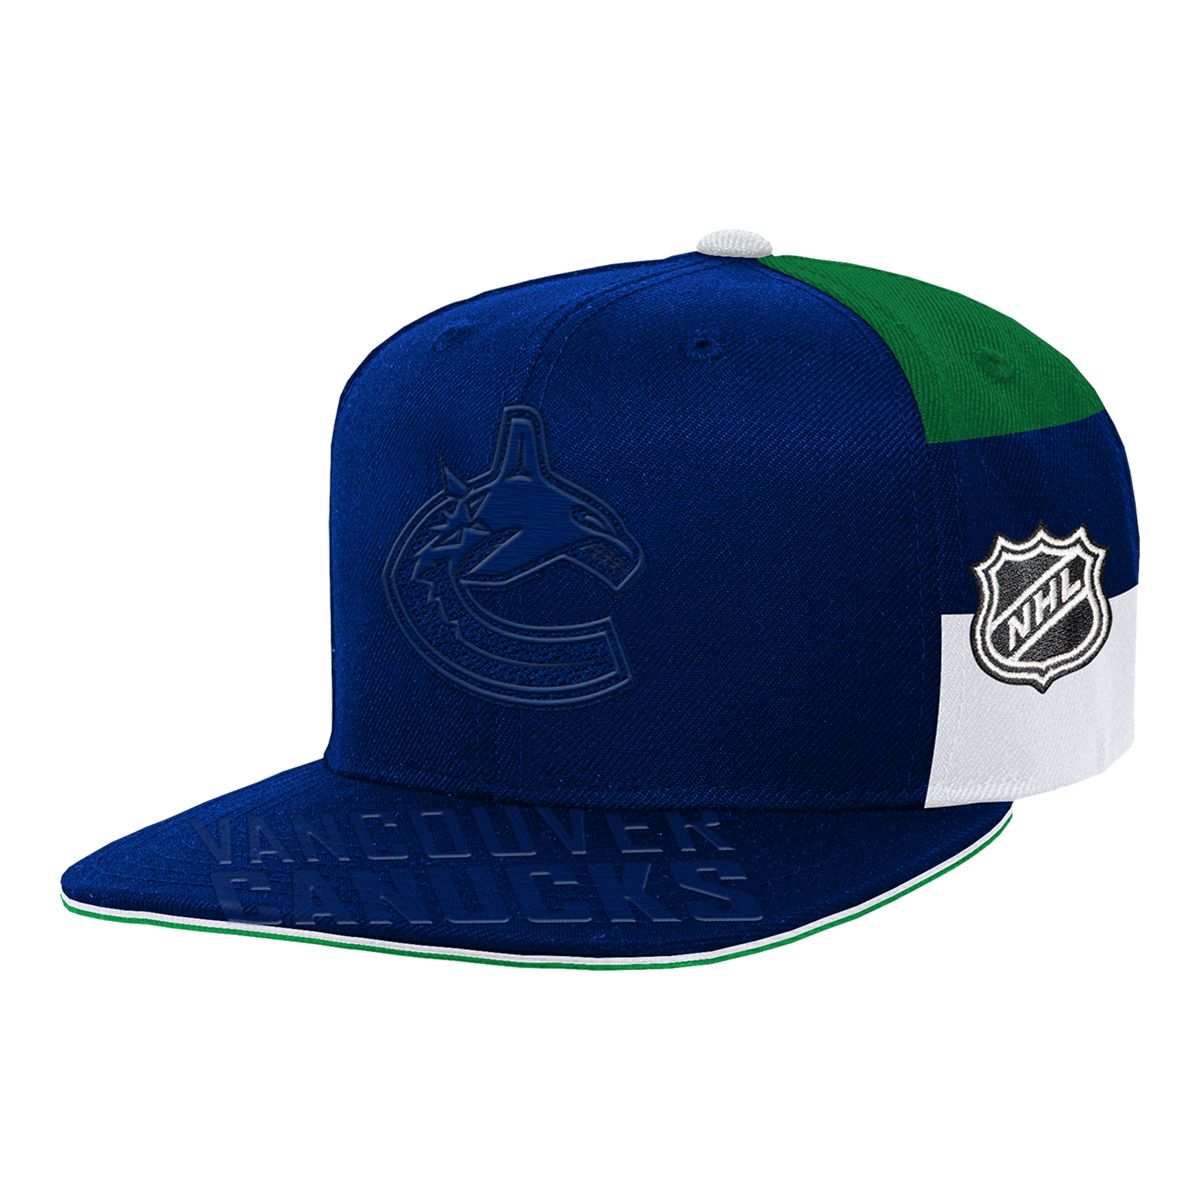  NHL by Outerstuff NHL Vancouver Canucks Kids & Youth